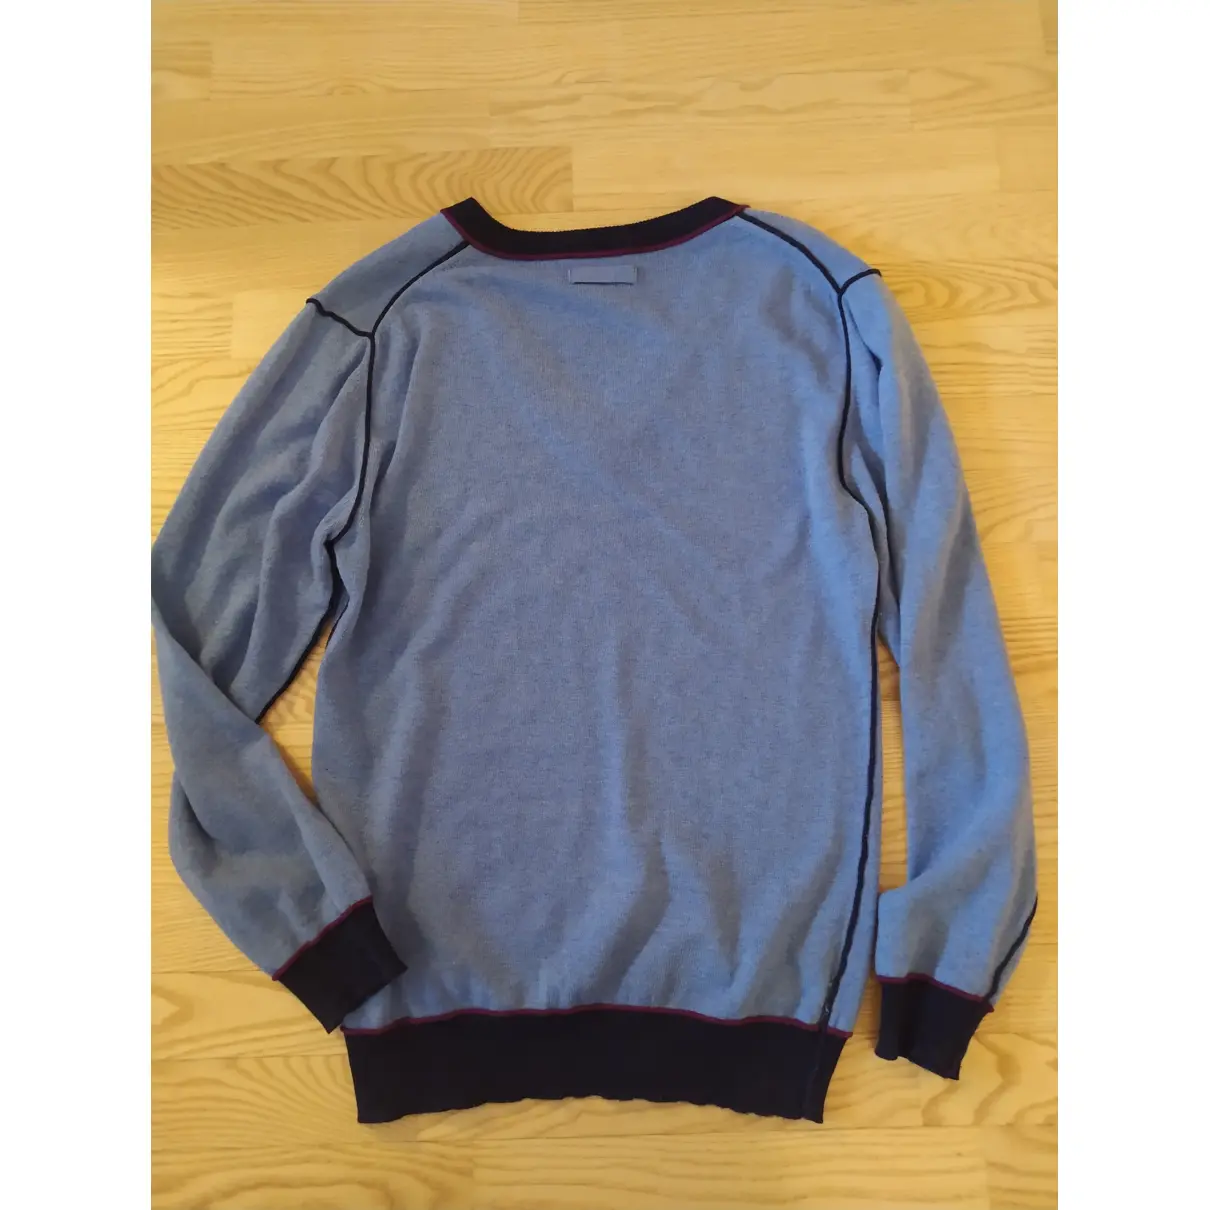 Buy D&G Cashmere pull online